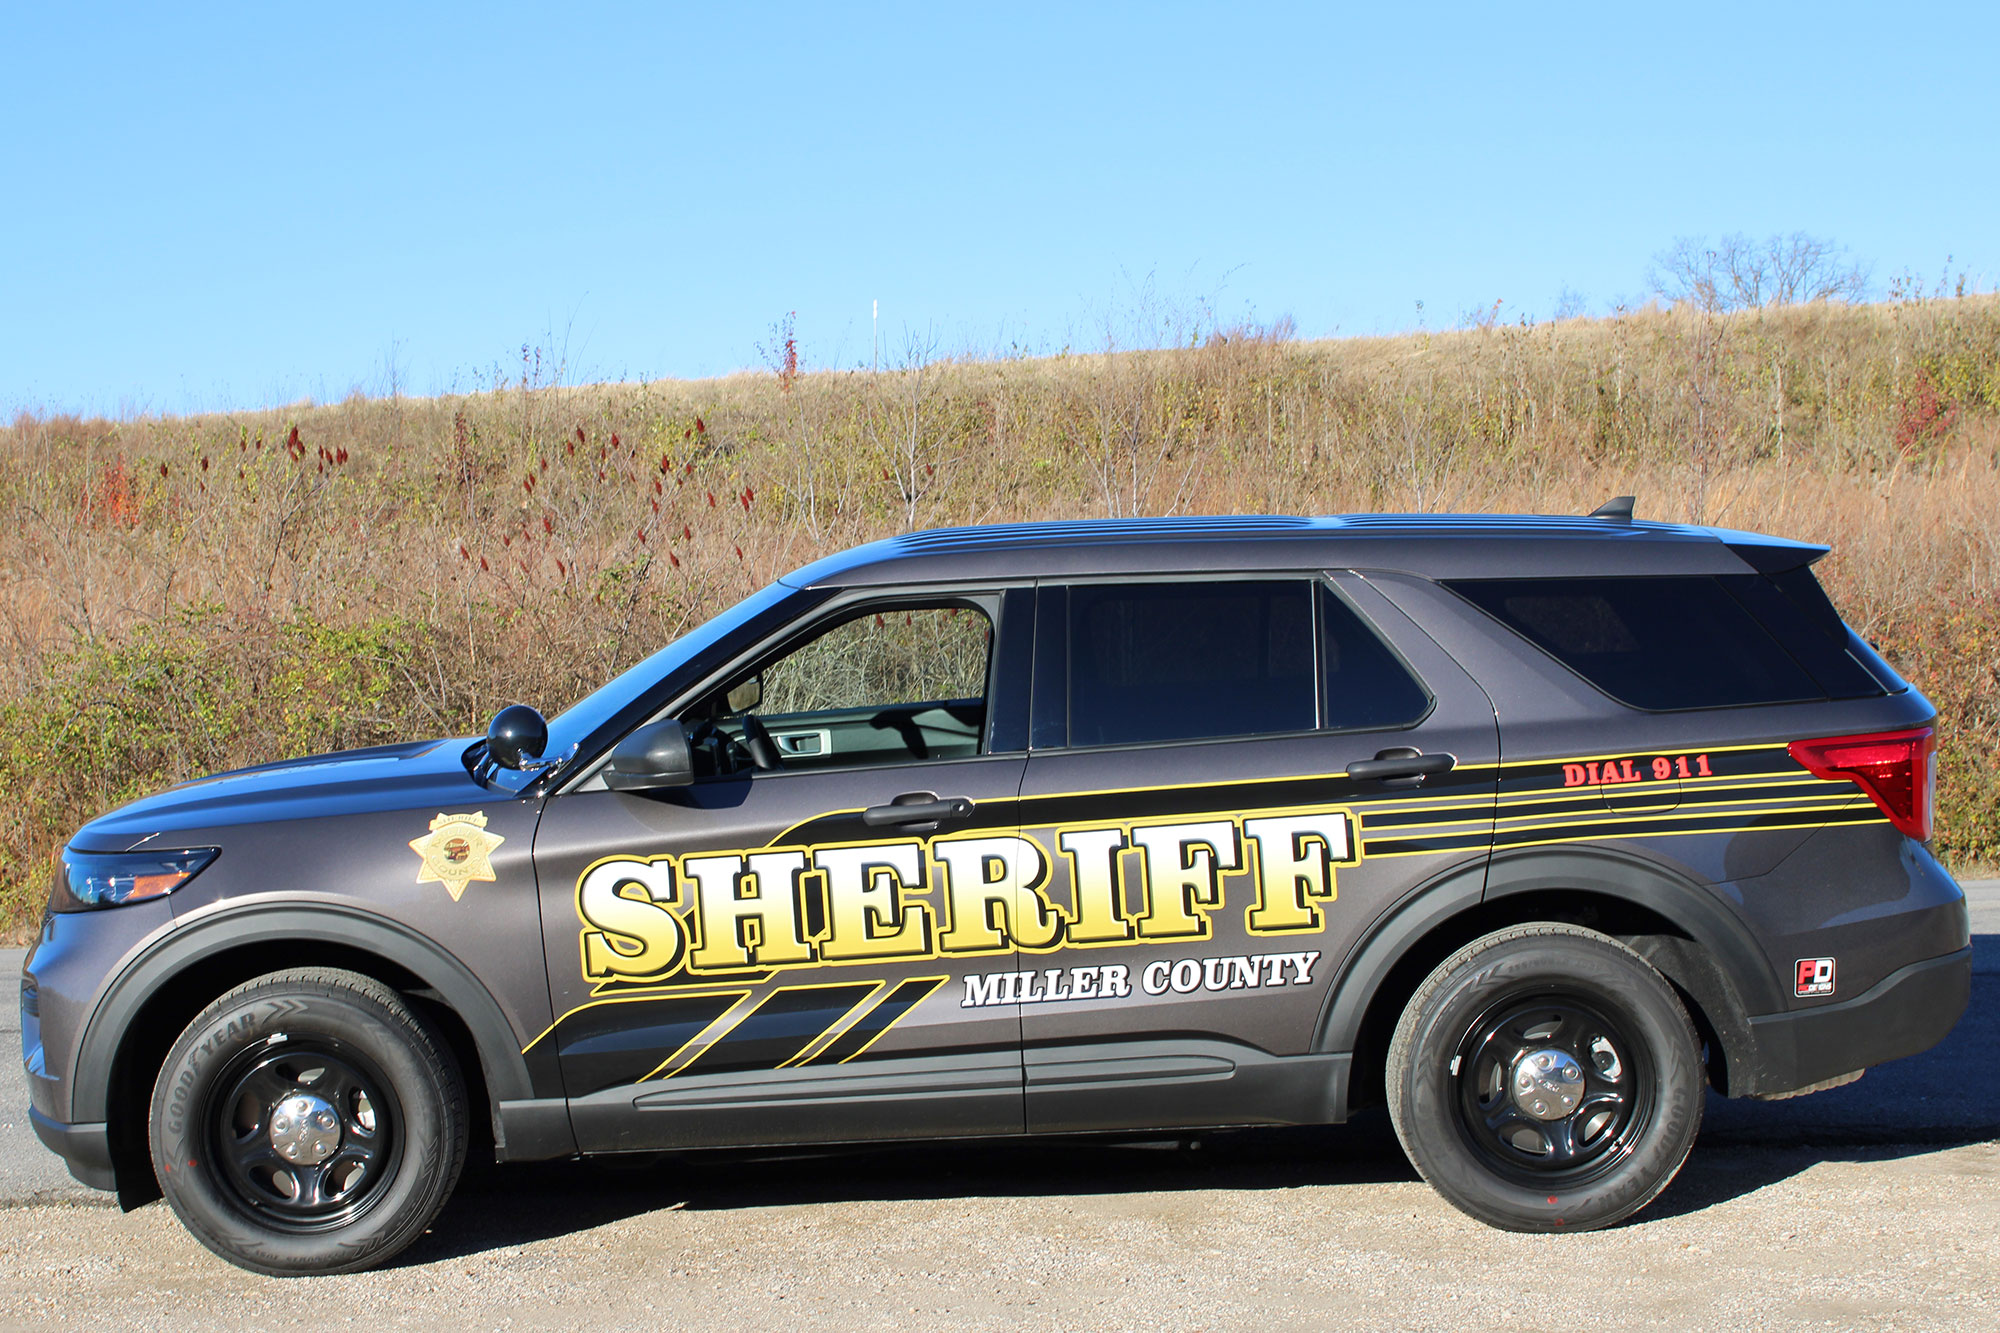 Sheriff Miler County Leo Police Highway Patrol Law Enforcement Fleet Vehicles Automotive Wrapping Pro Dezigns Central Missouri